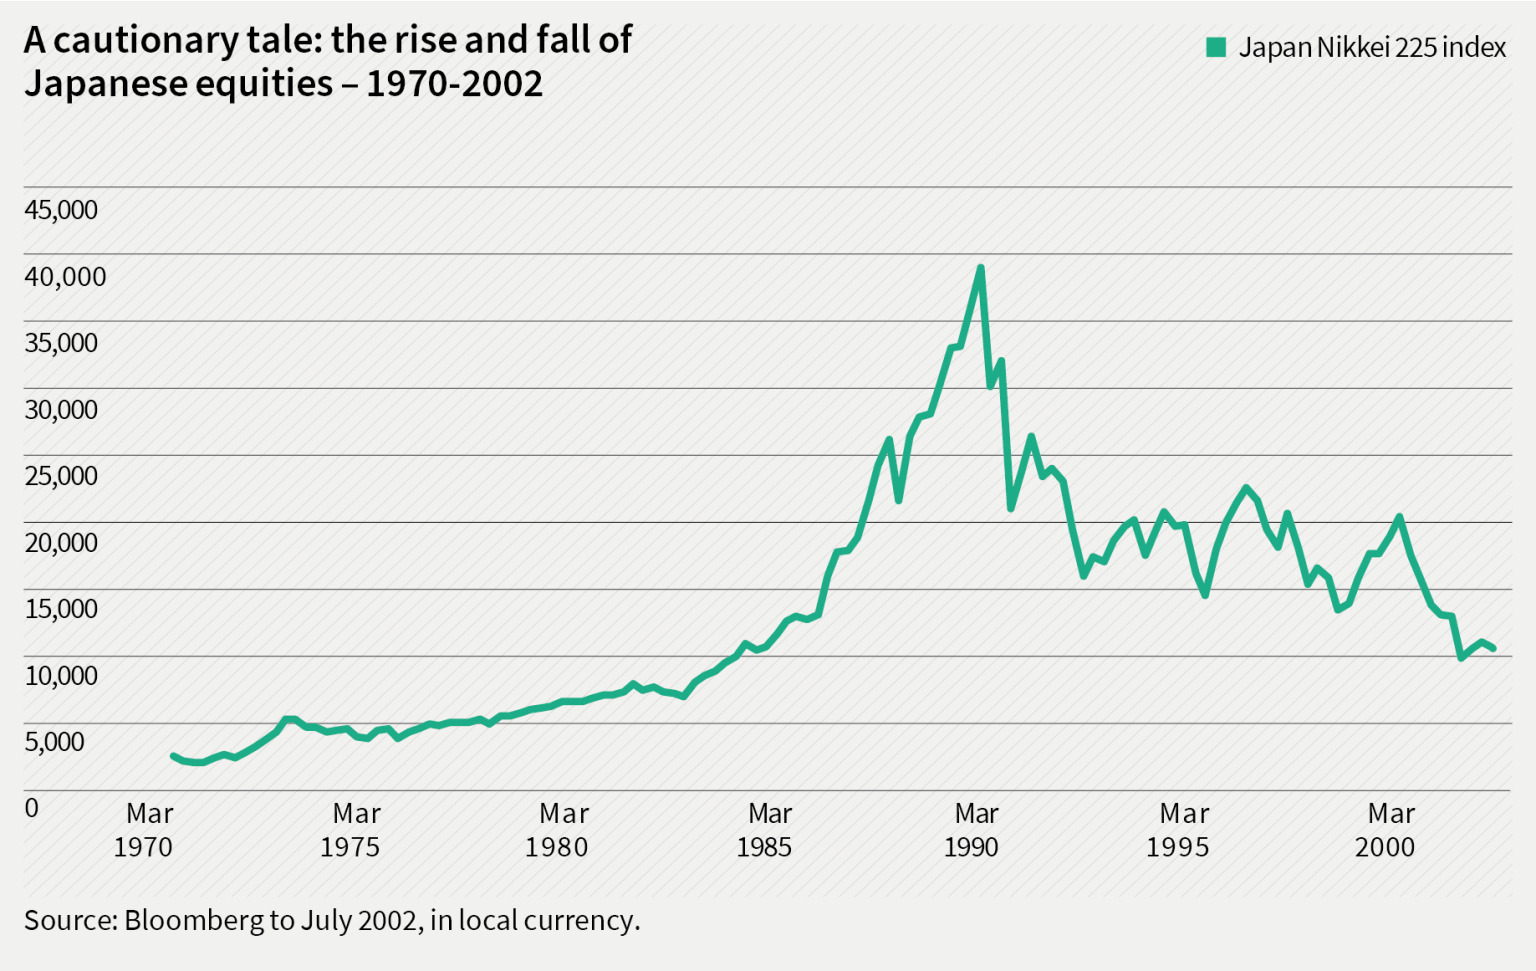 A cautionary tale: the rise and fall of Japanese equities - 1970-2002